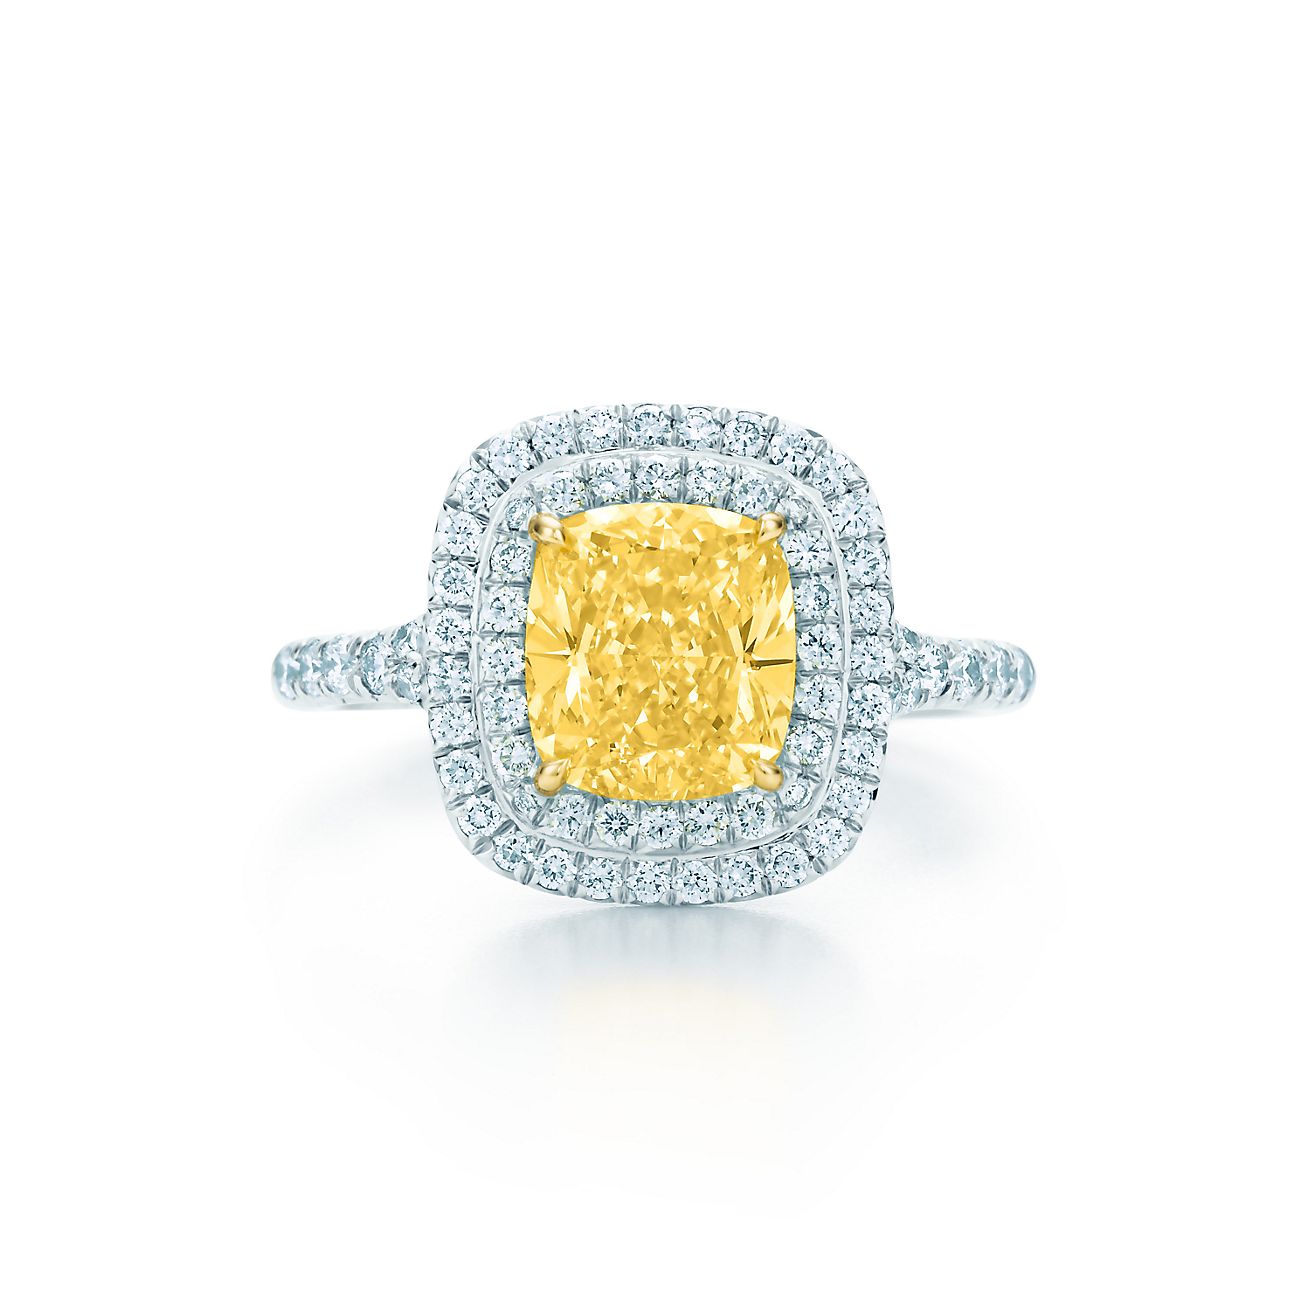 Tiffany co yellow gold engagement rings